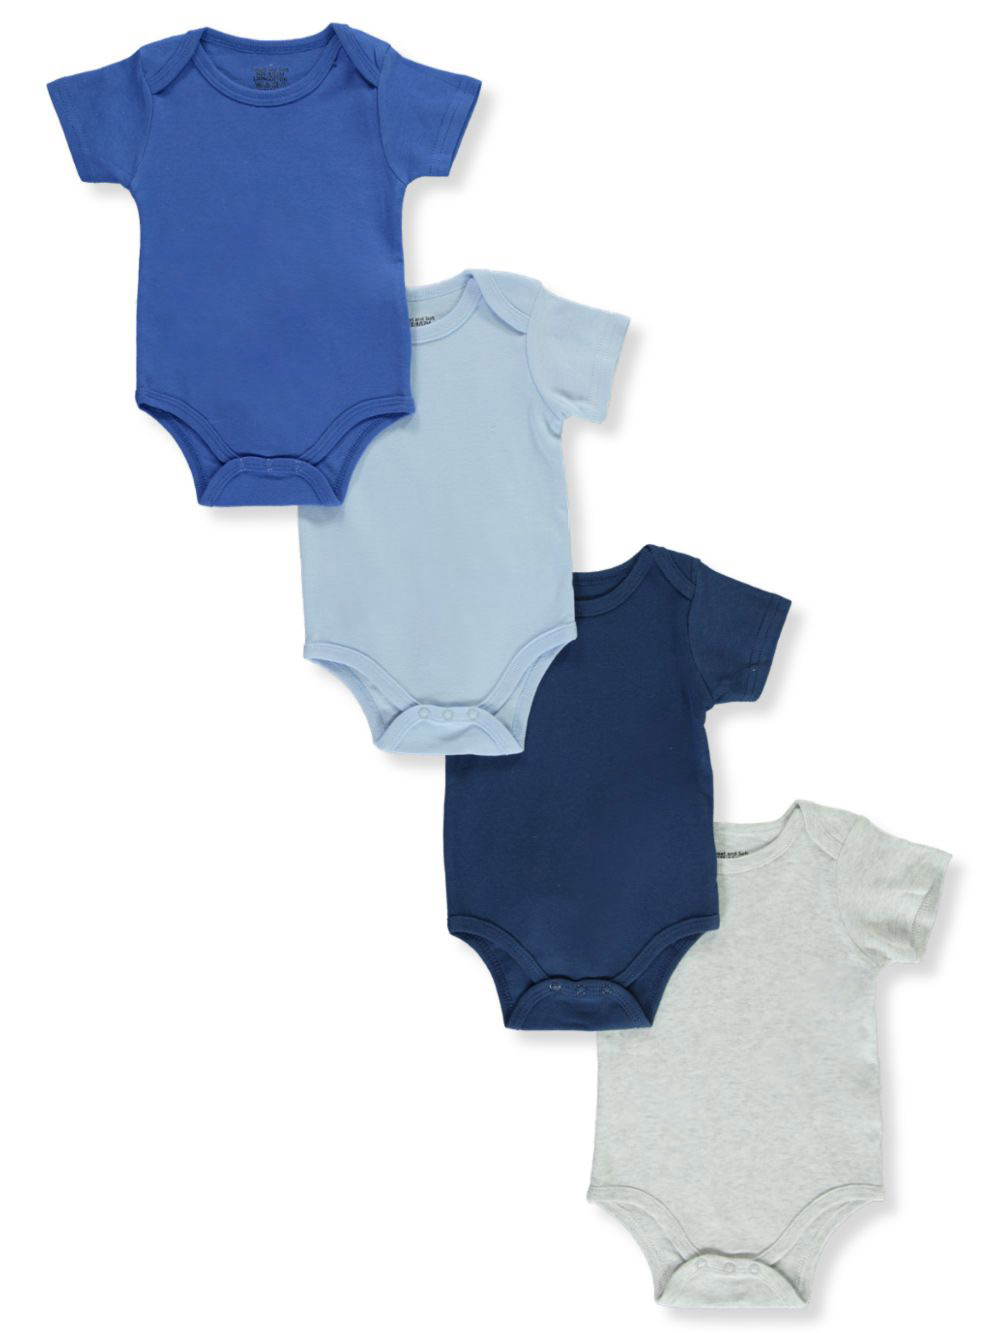 Boys Blue and Multicolor Bodysuits